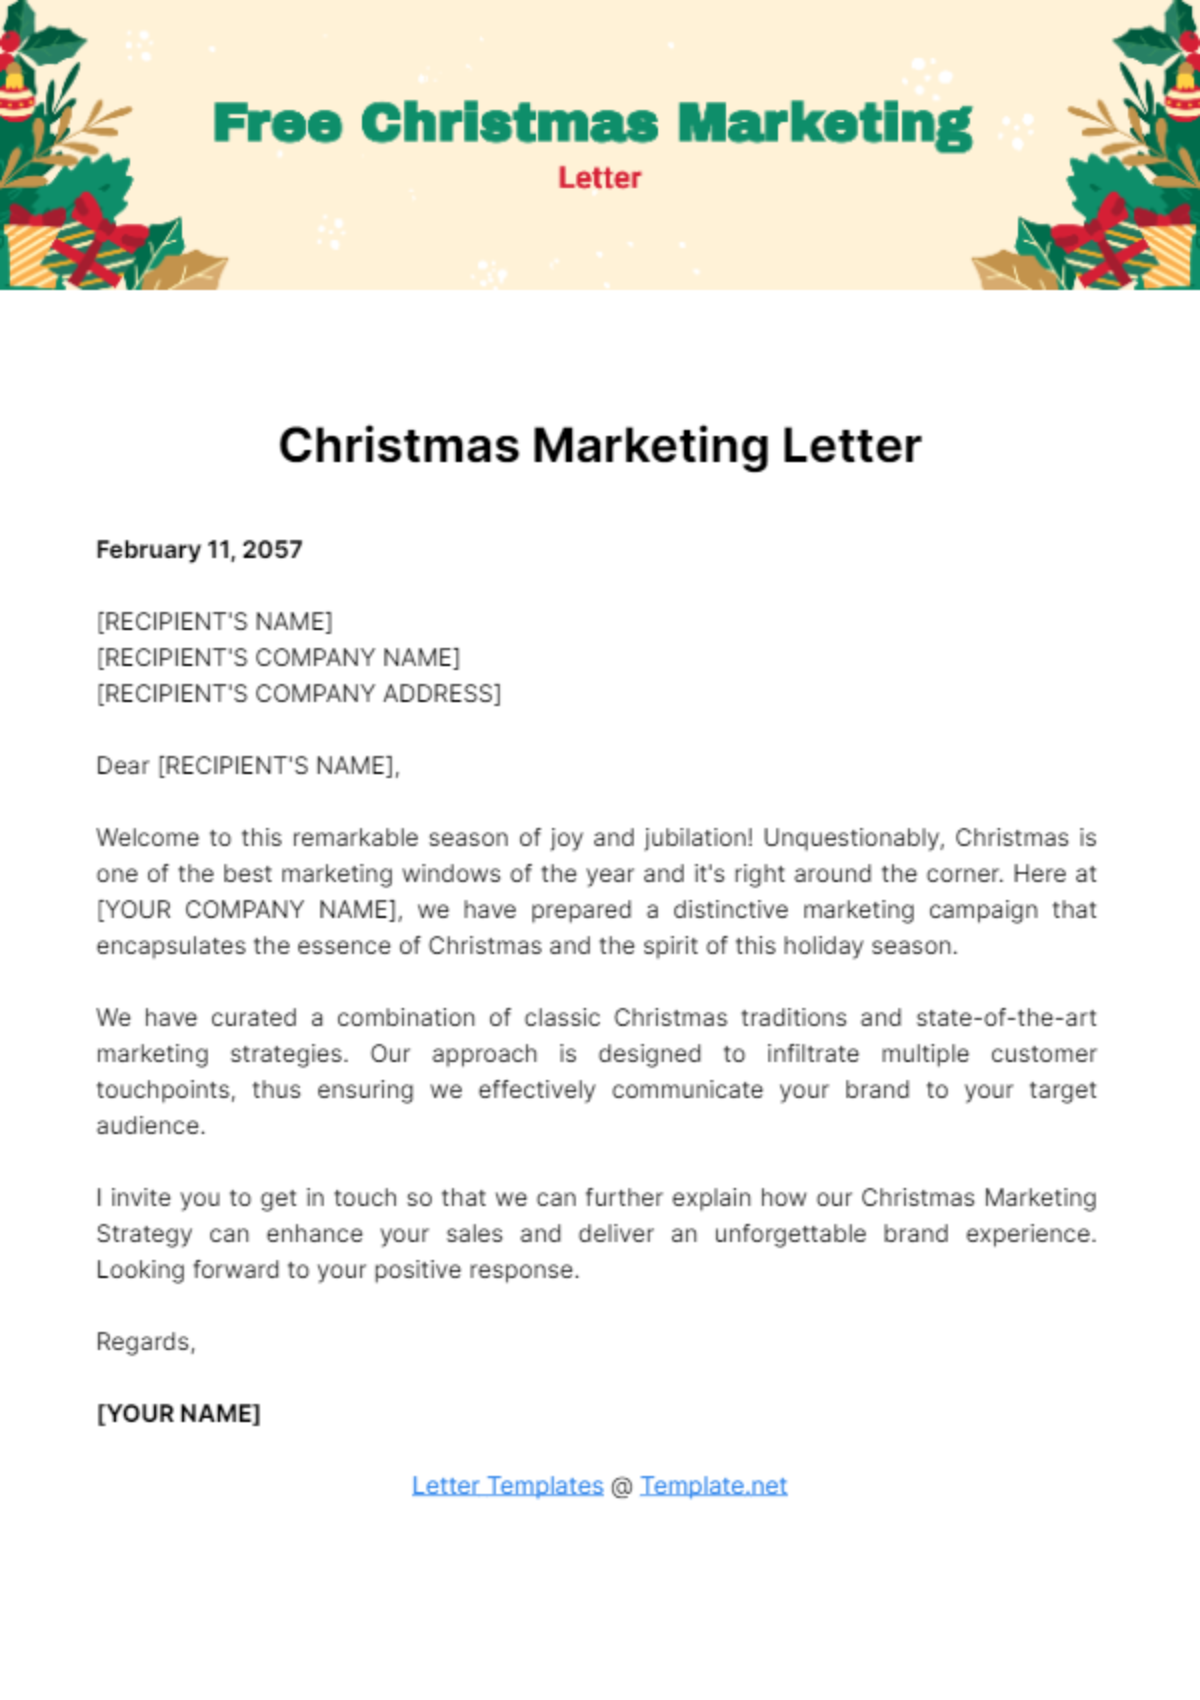 Free Christmas Marketing Letter Template